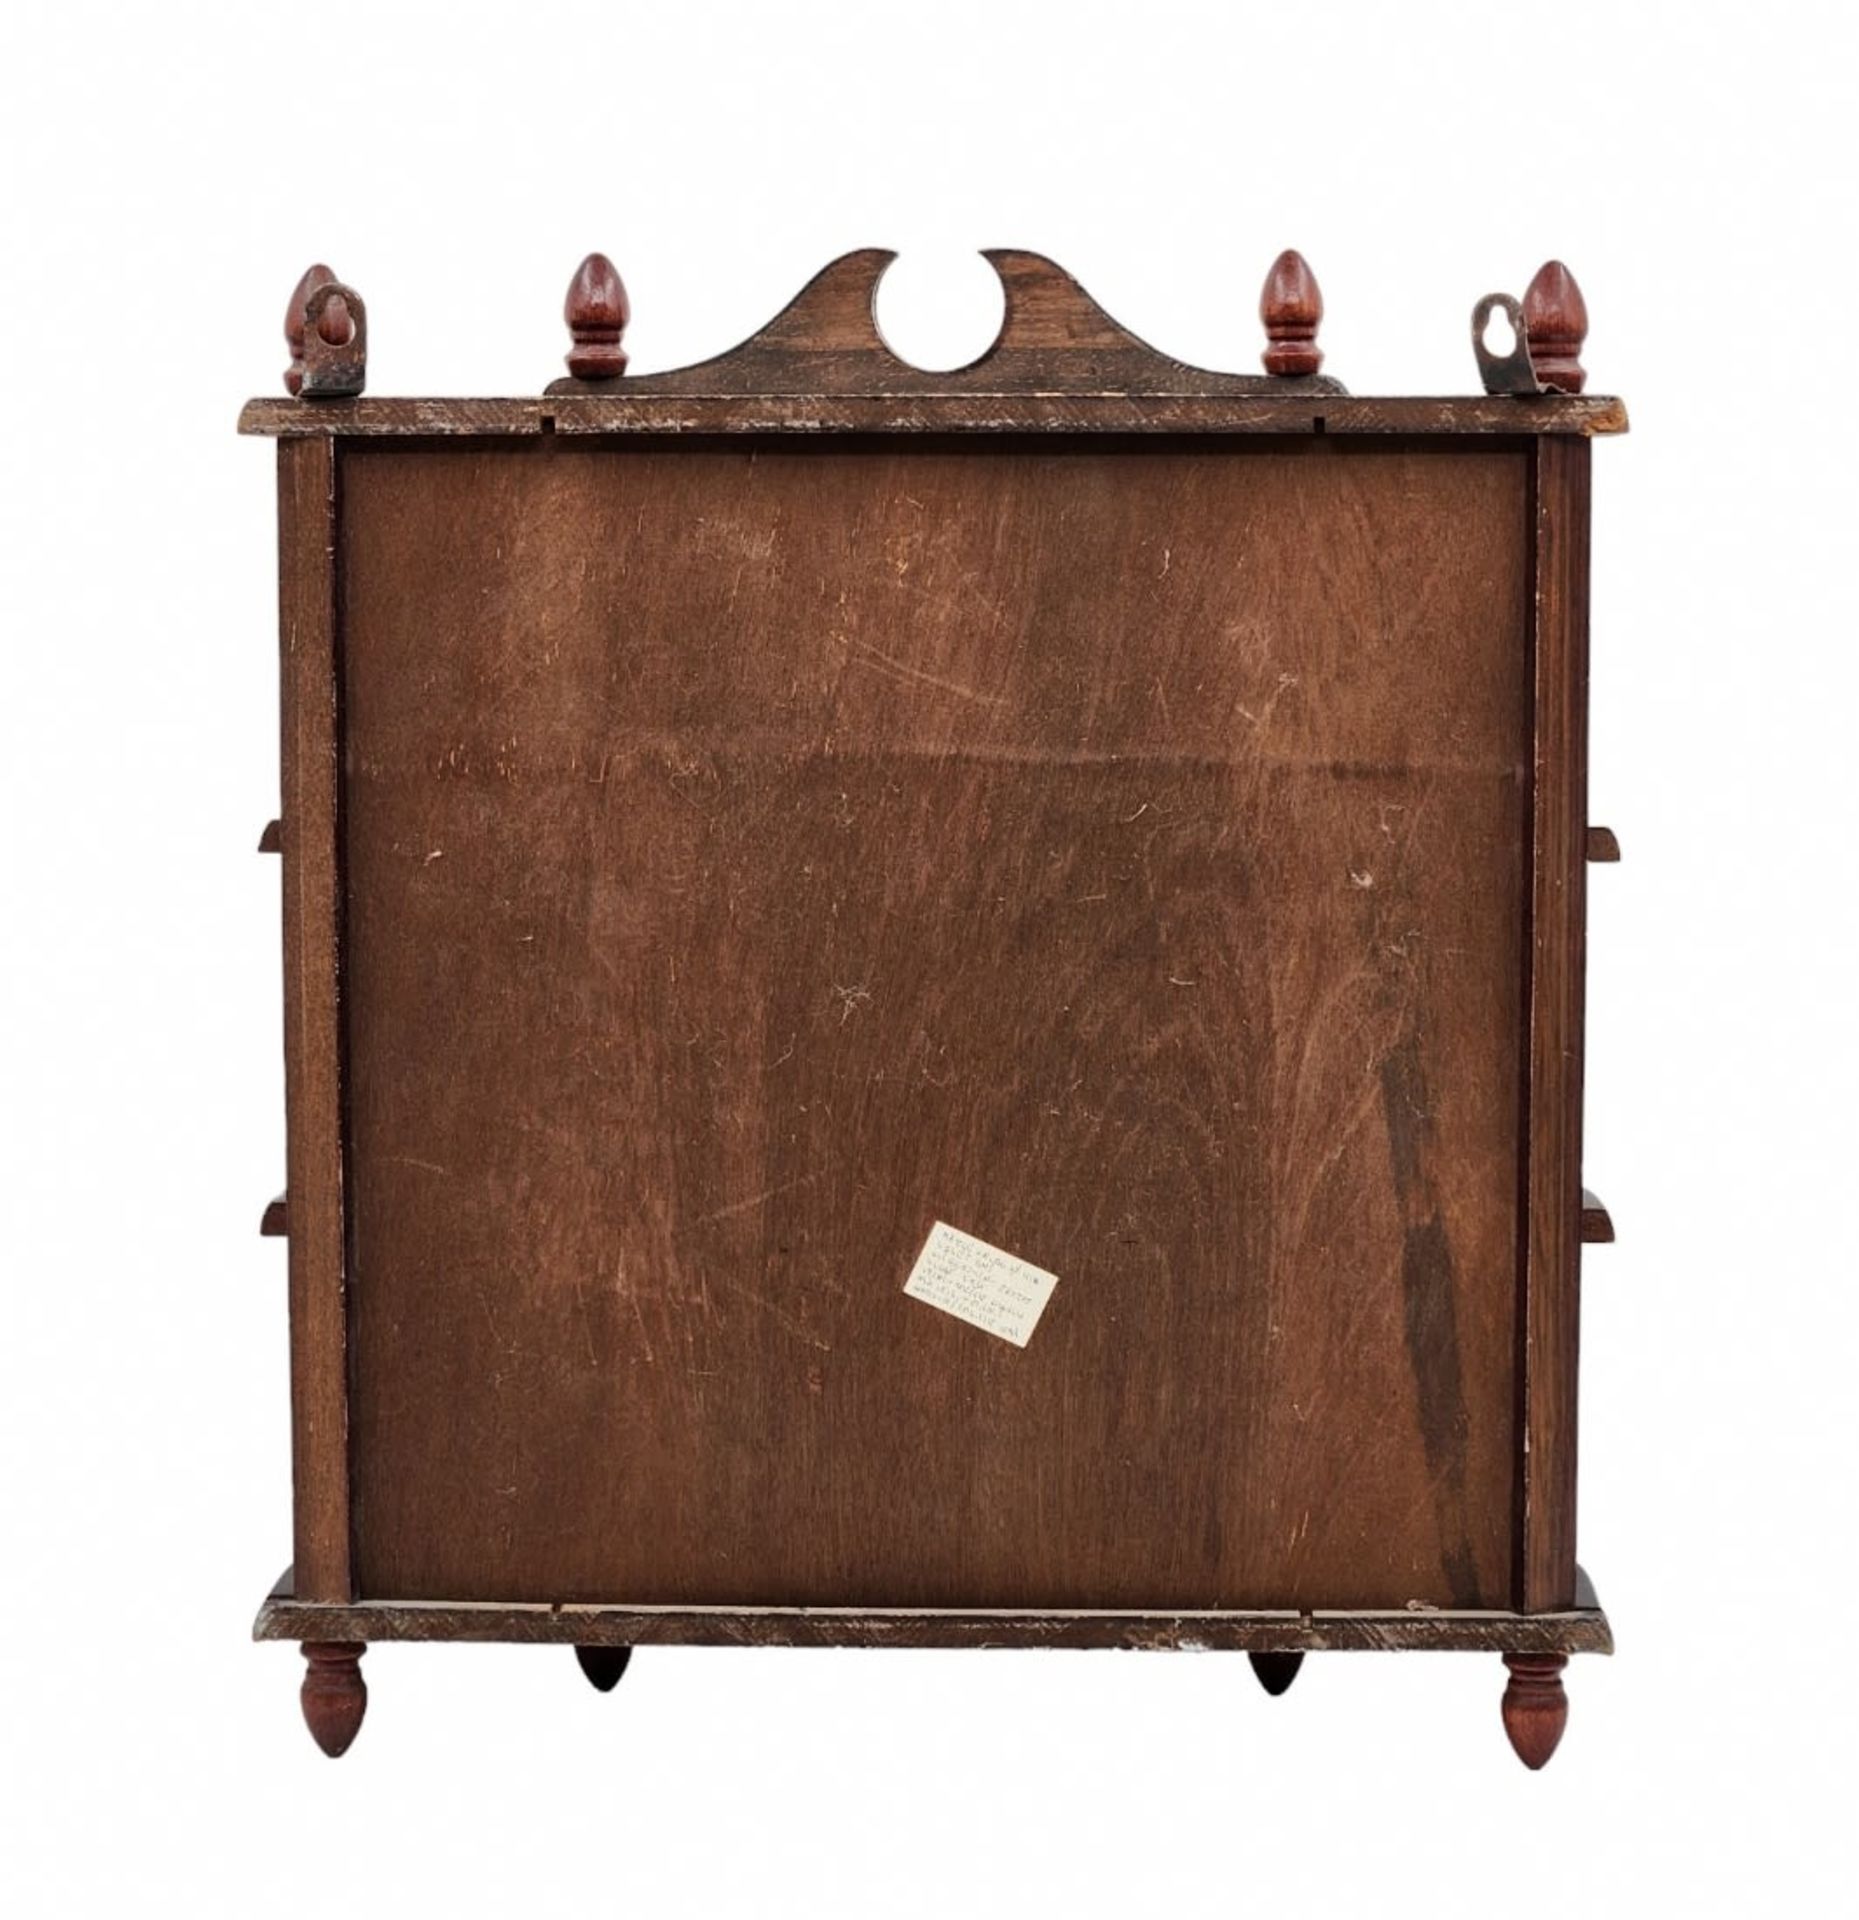 #2 A small wall cabinet for hanging, cabinet made of wood, glass and metal device, condition - Image 3 of 4